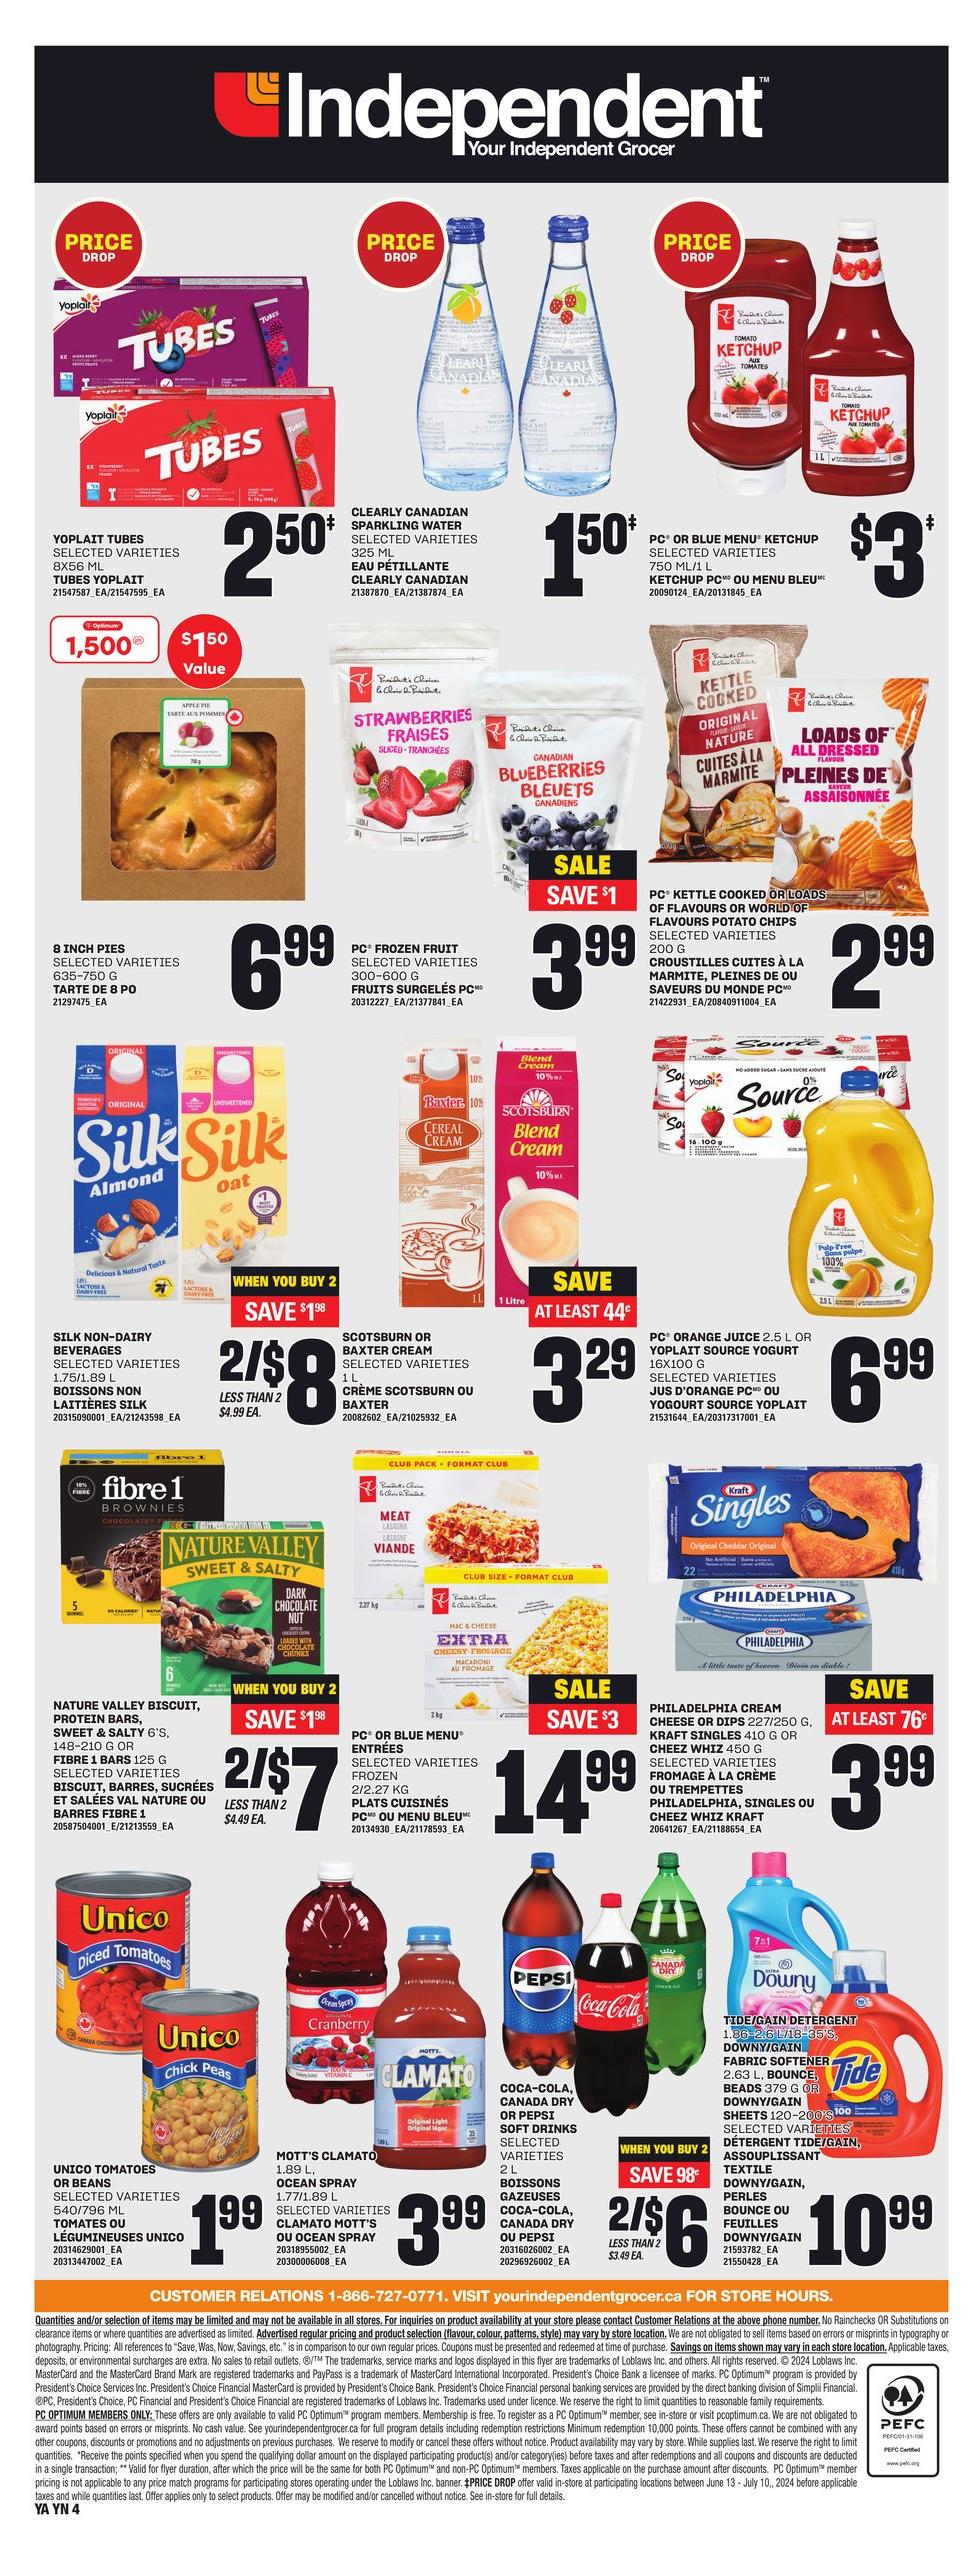 Independent - Atlantic - Weekly Flyer Specials - Page 3